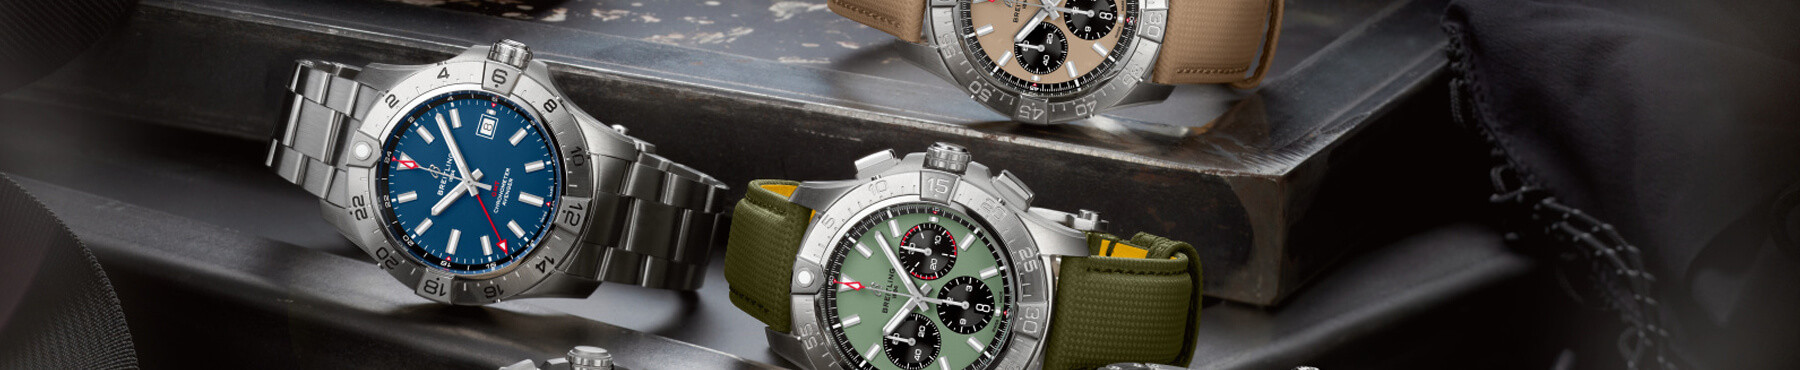 Breitling Avenger Watches